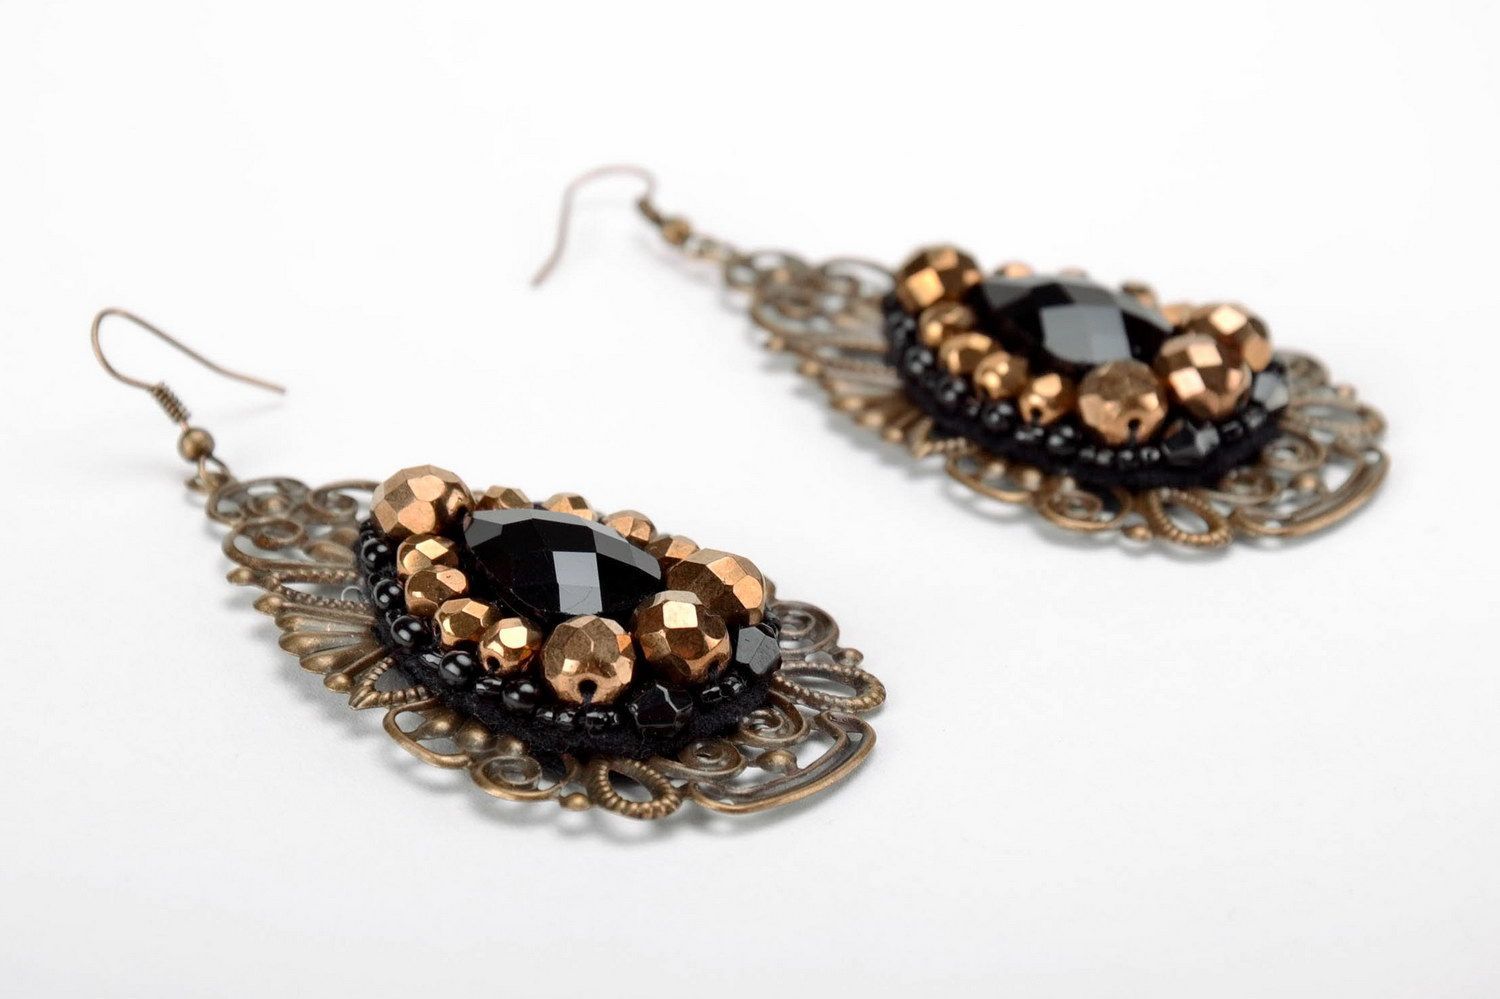 Earrings made of Czech crystals photo 3